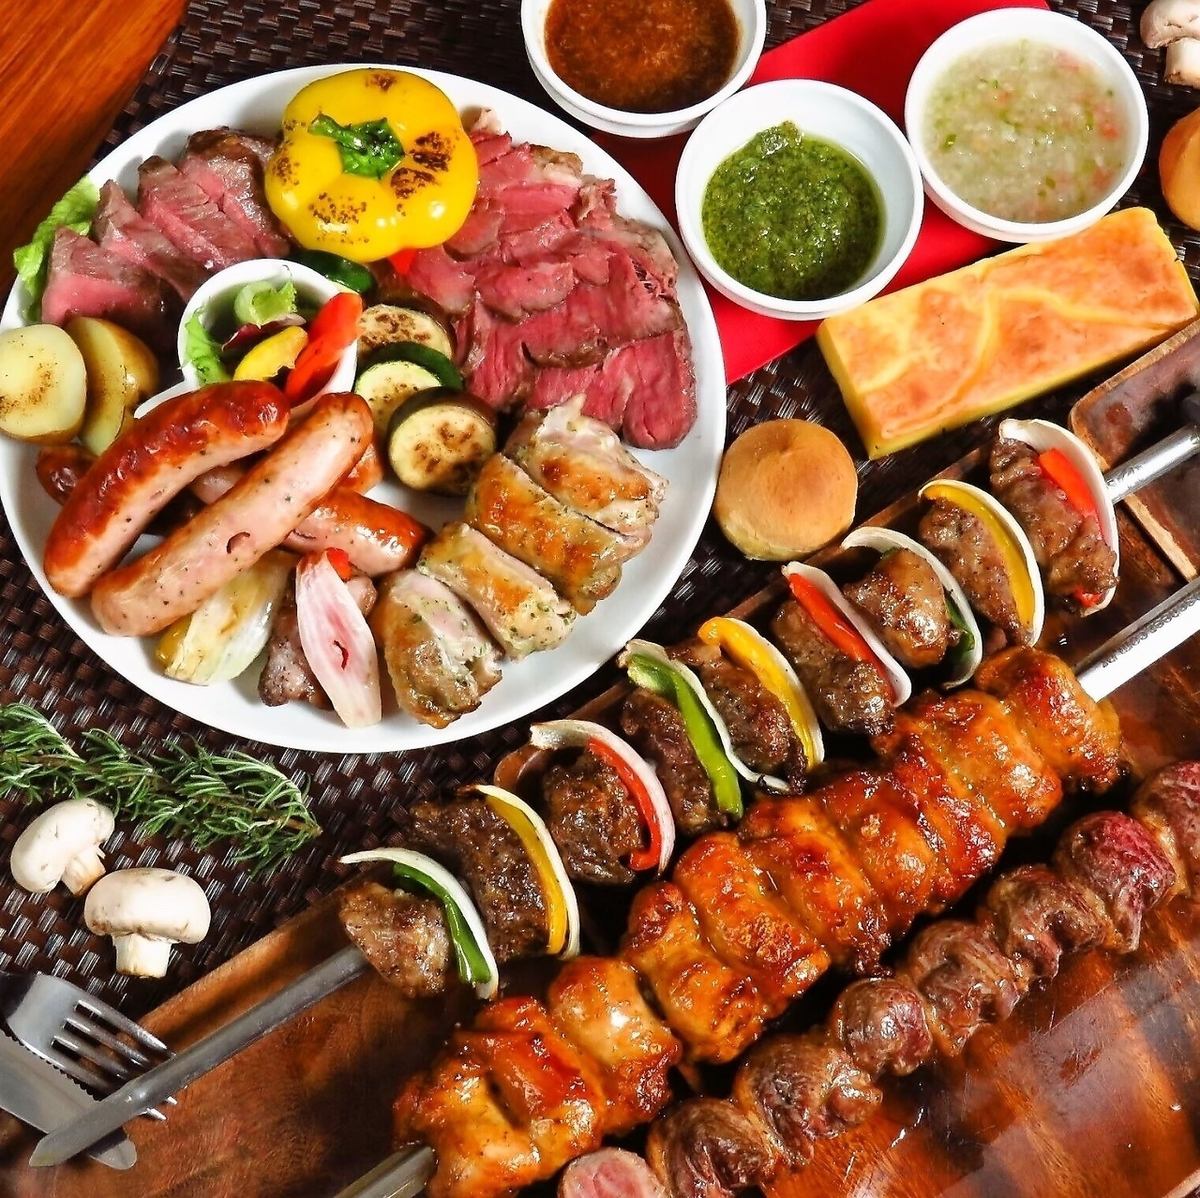 Enjoy as much meat as you like! All-you-can-eat 20 types of churrasco!